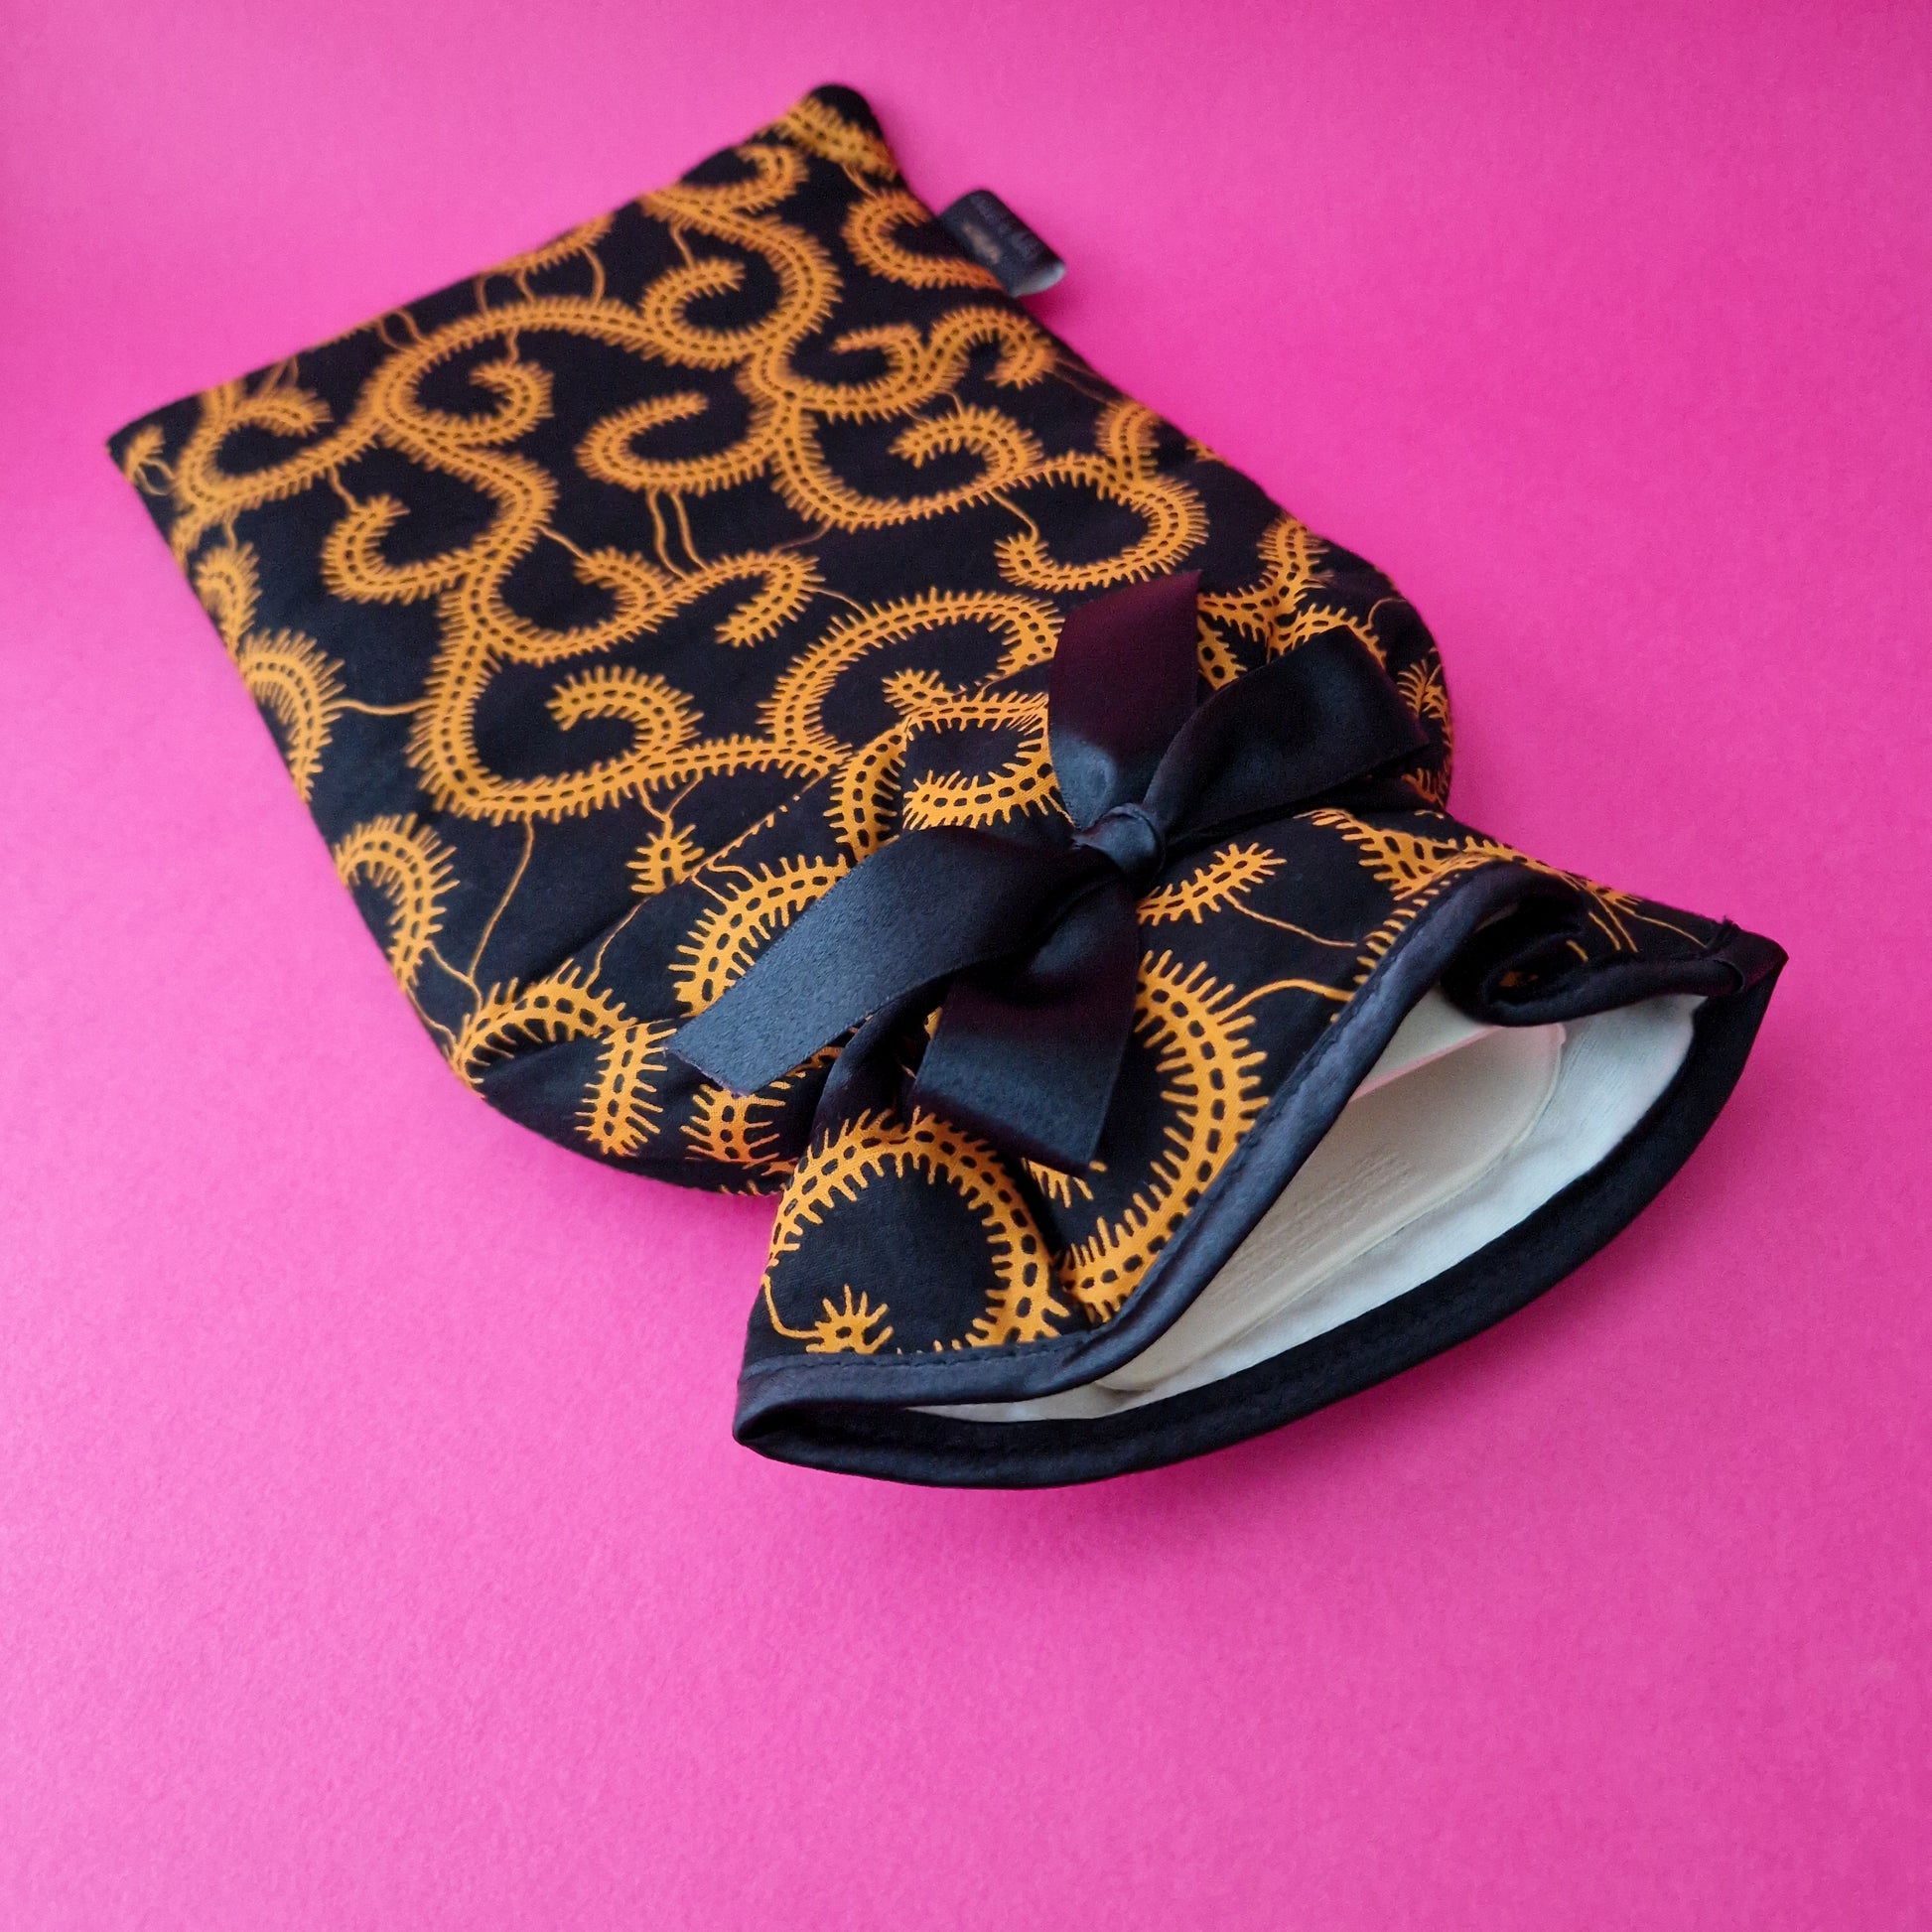 Black african print hot water bottle cover